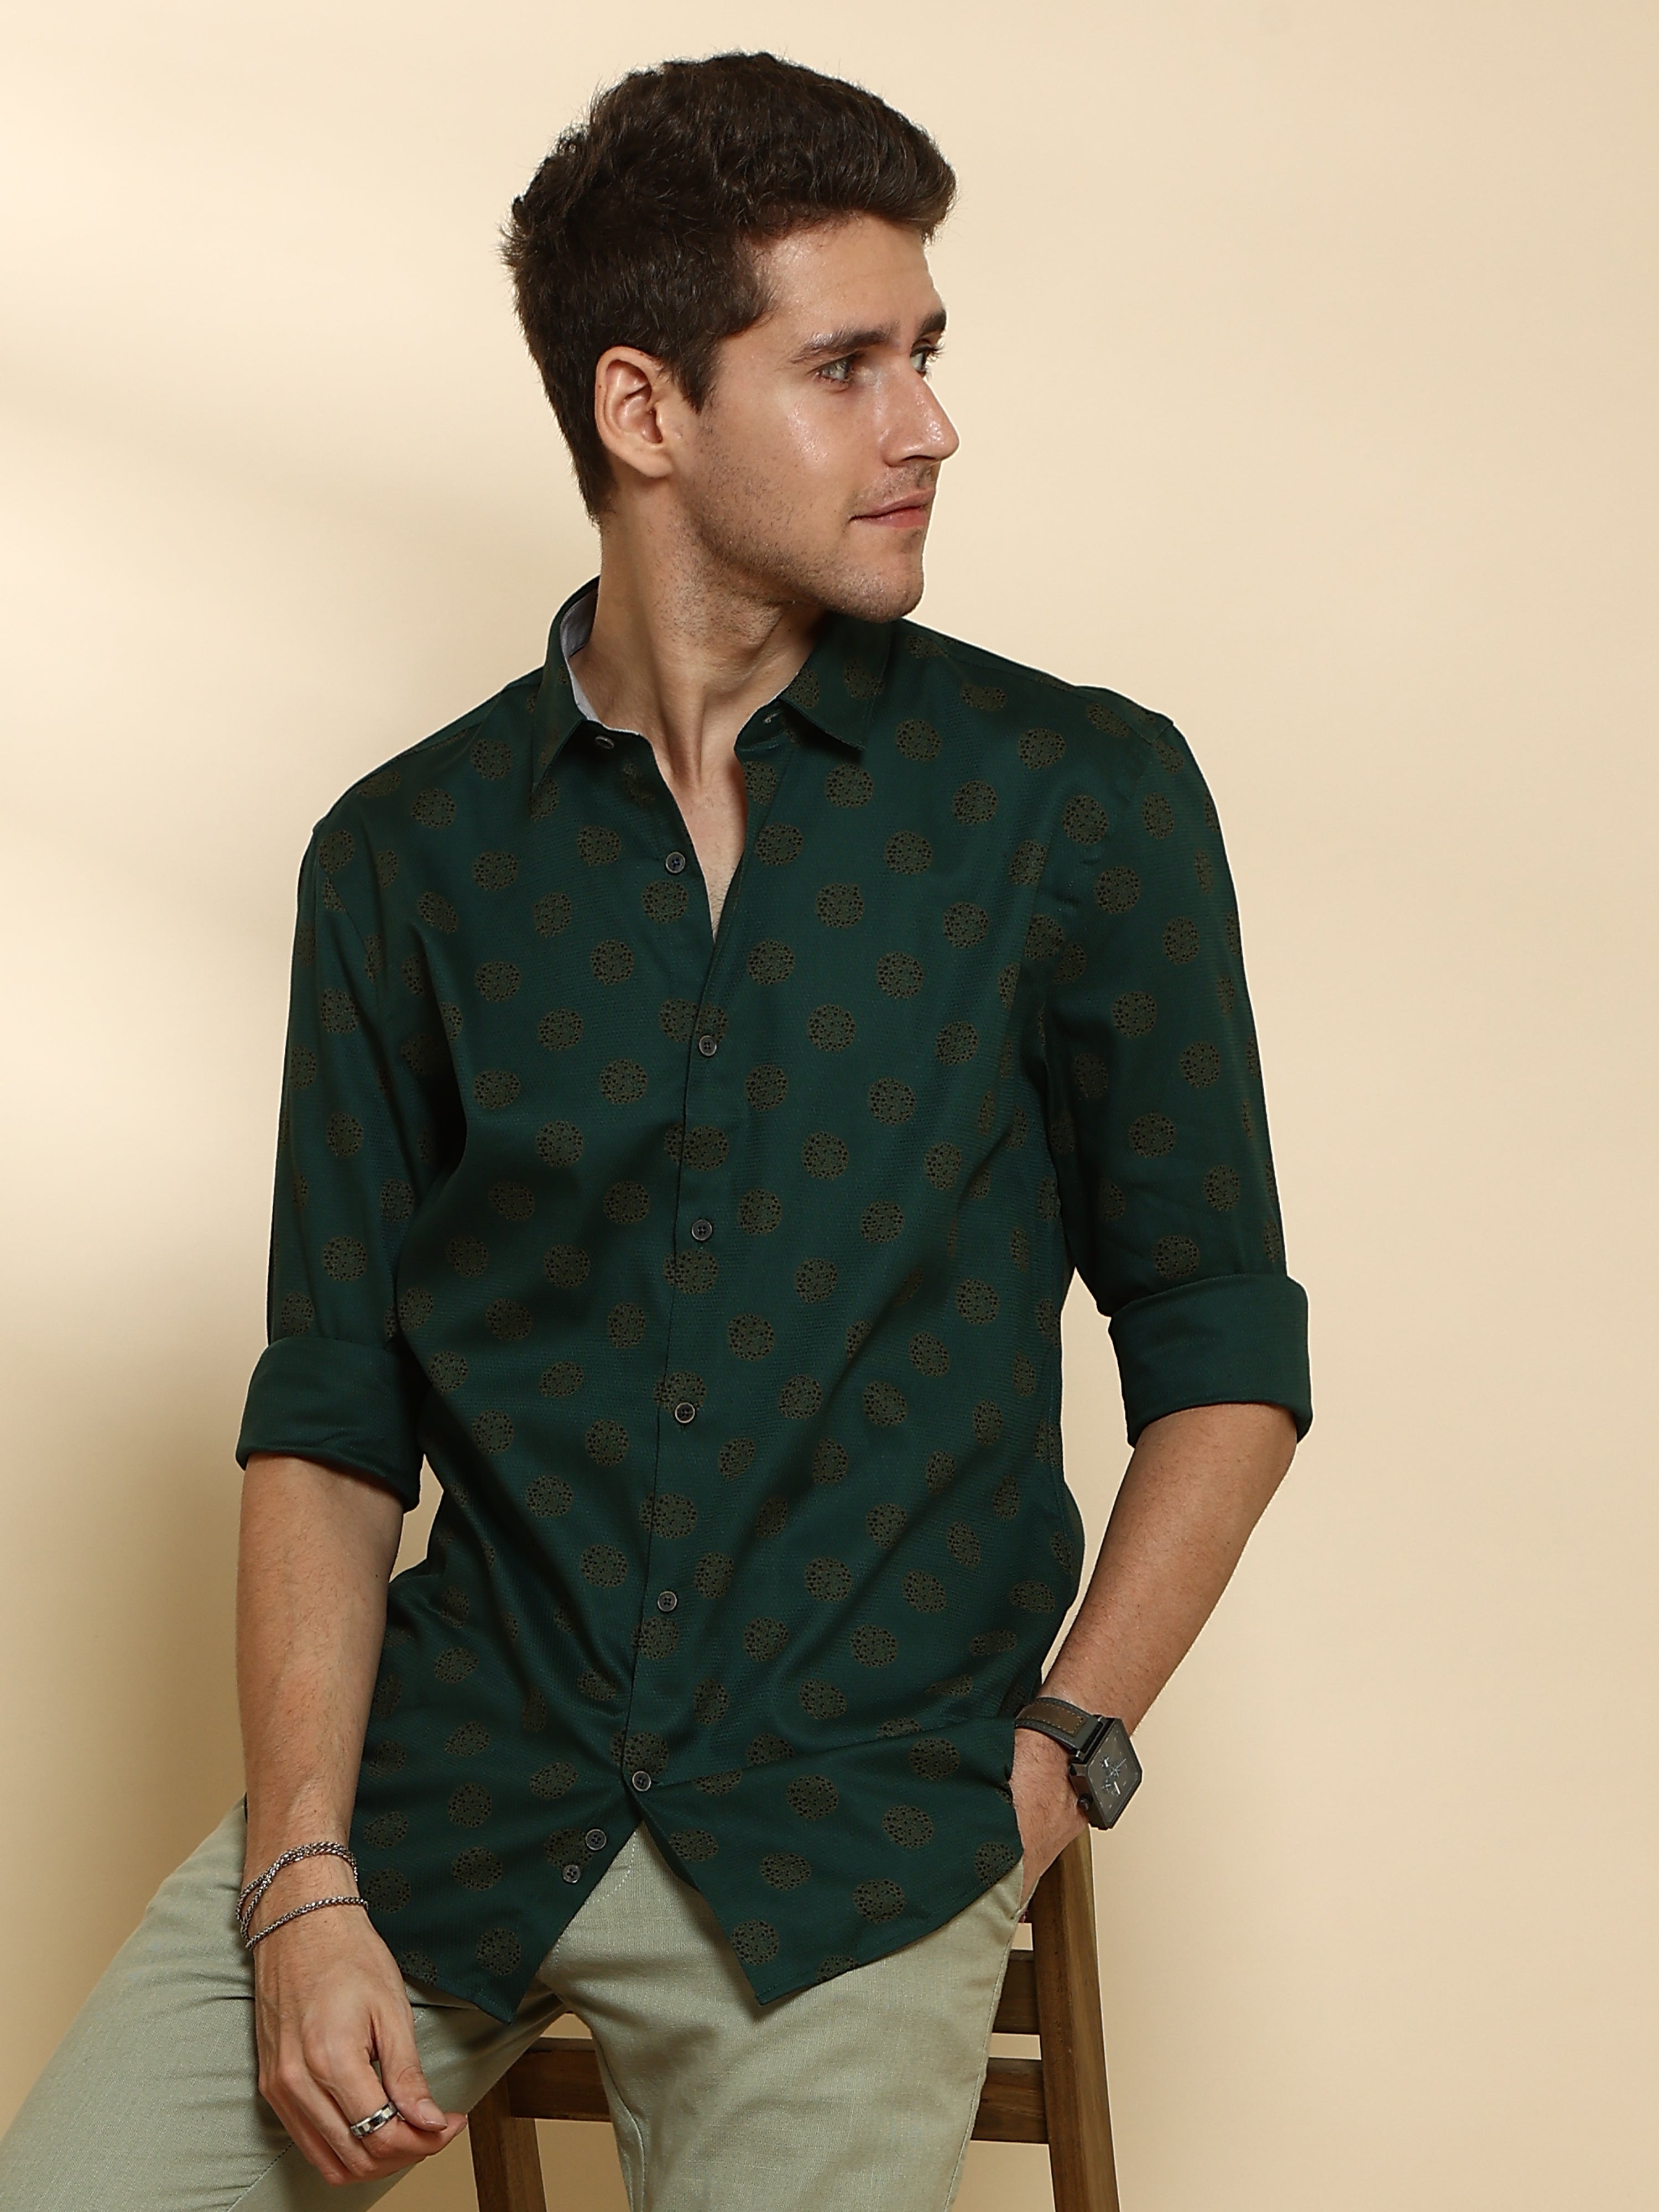 Dobby Dream Green Semi Casual Shirt shop online at Estilocus. • Full-sleeve jacquard shirt• Cut and sew placket• Regular collar• Double button square cuff.• Single pocket with logo embroidery• Curved hemline• Finest quality sewing• Machine wash care• Suit